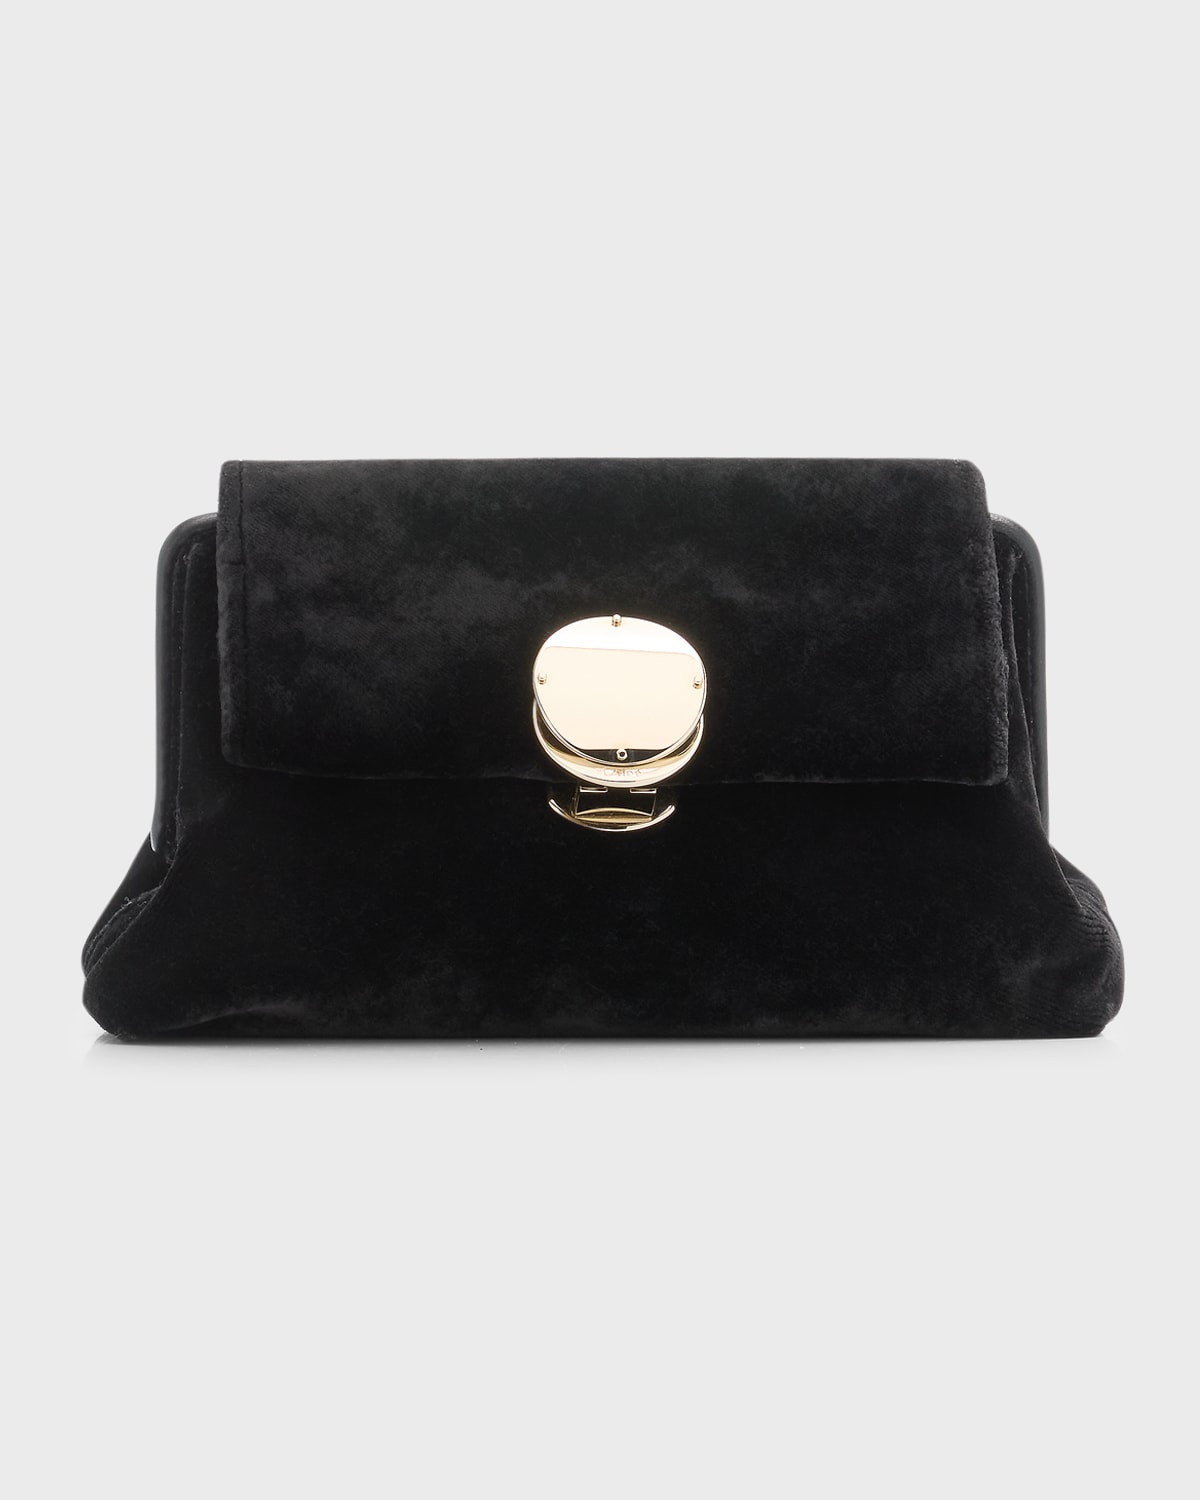 Penelope Small Terry Cloth Clutch Bag